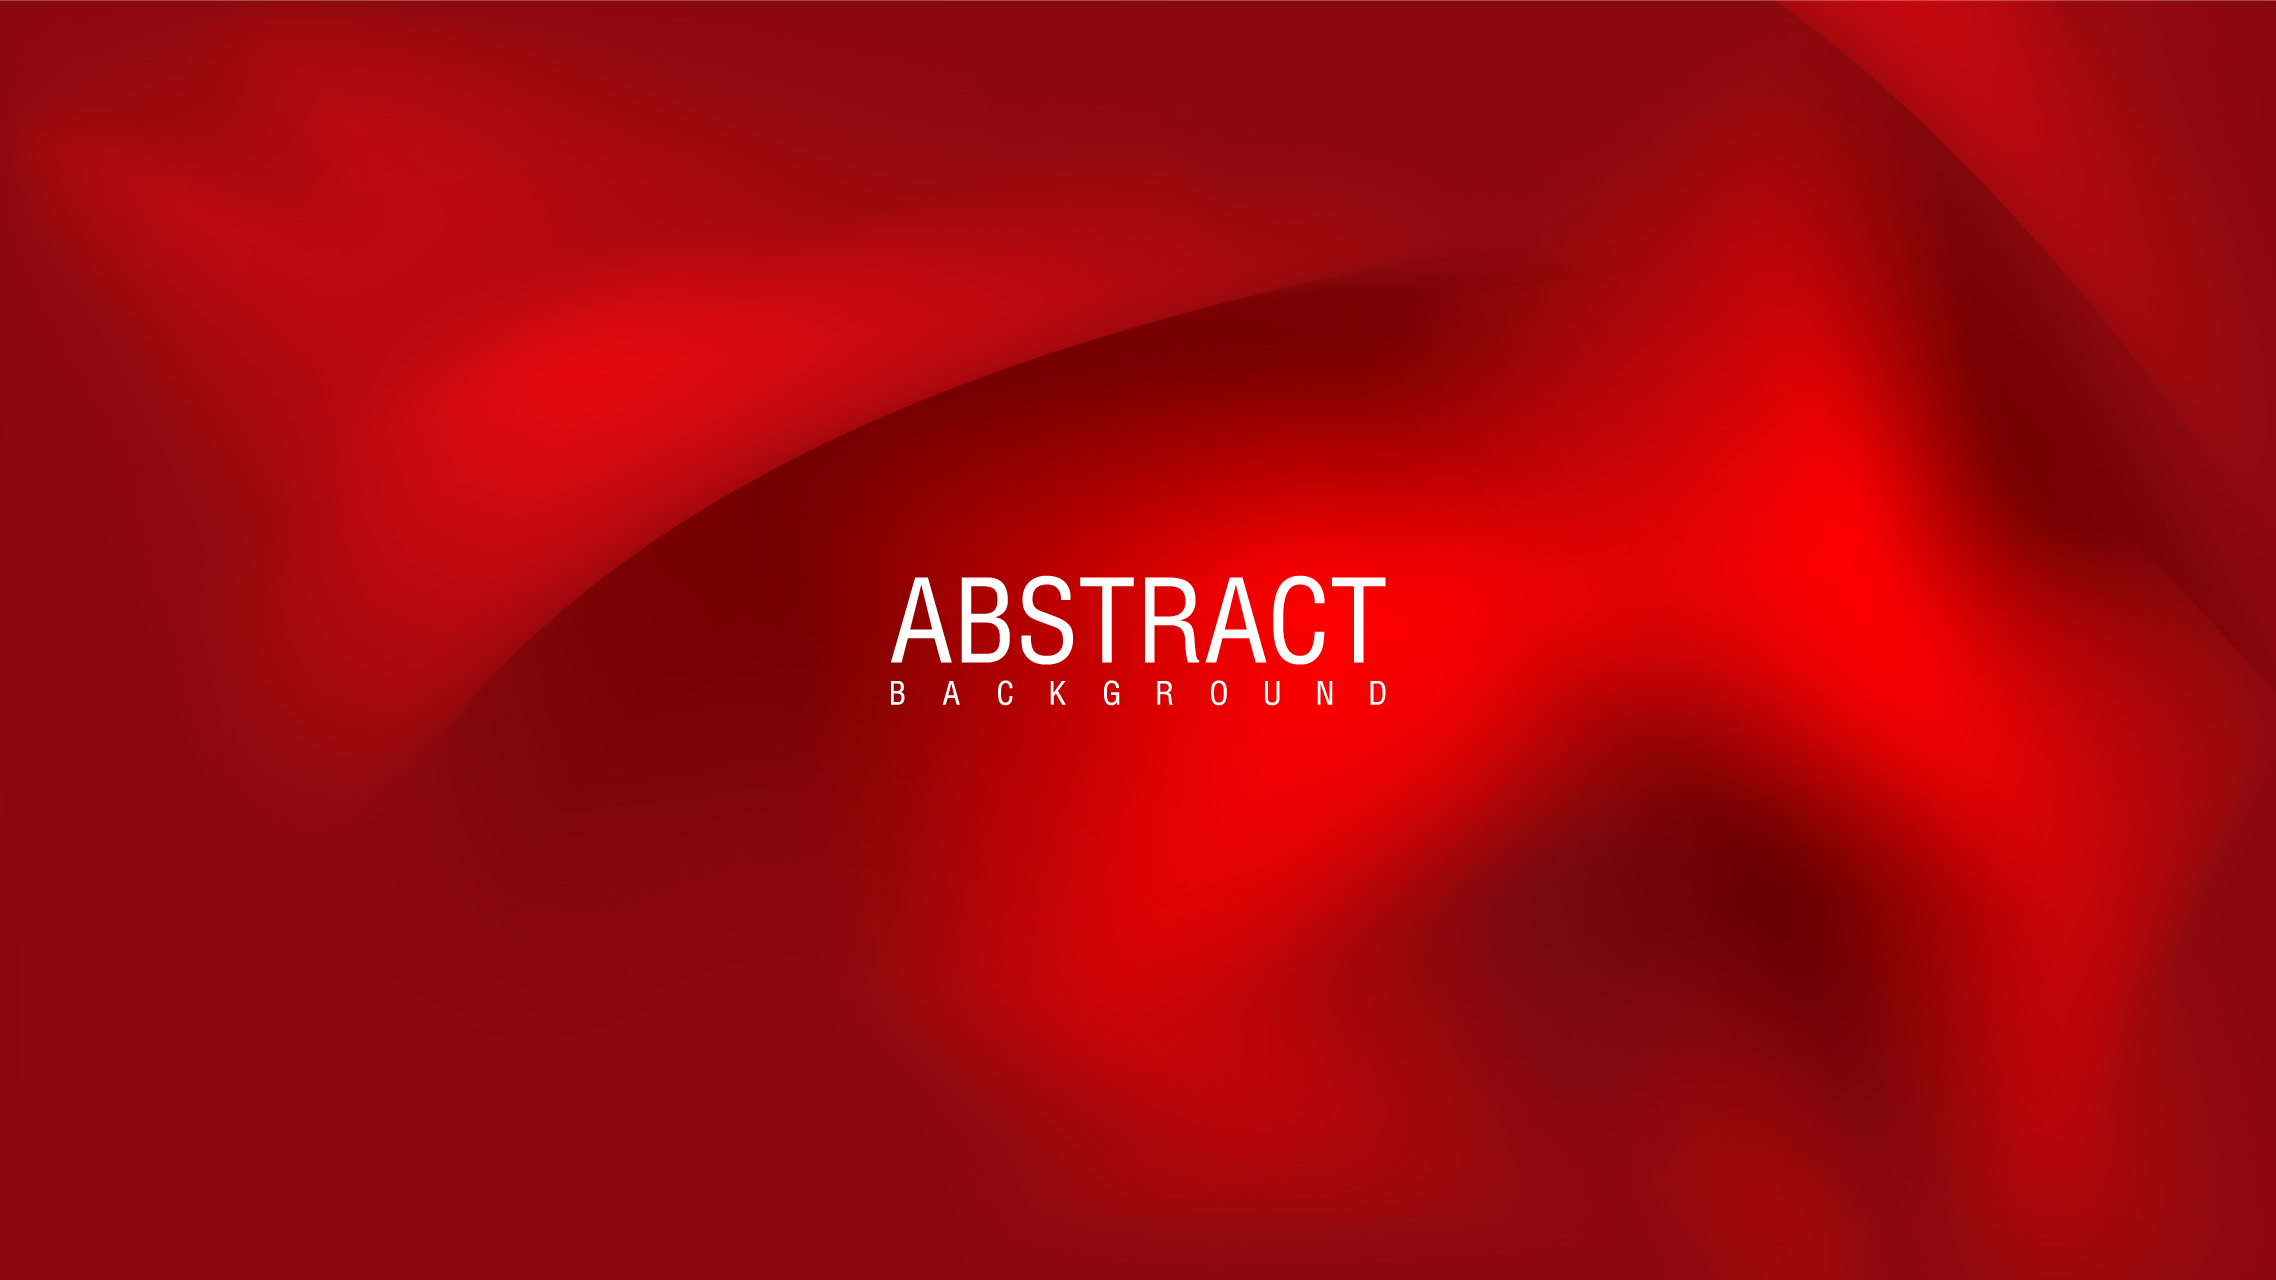 Red background with the word abstract in white.